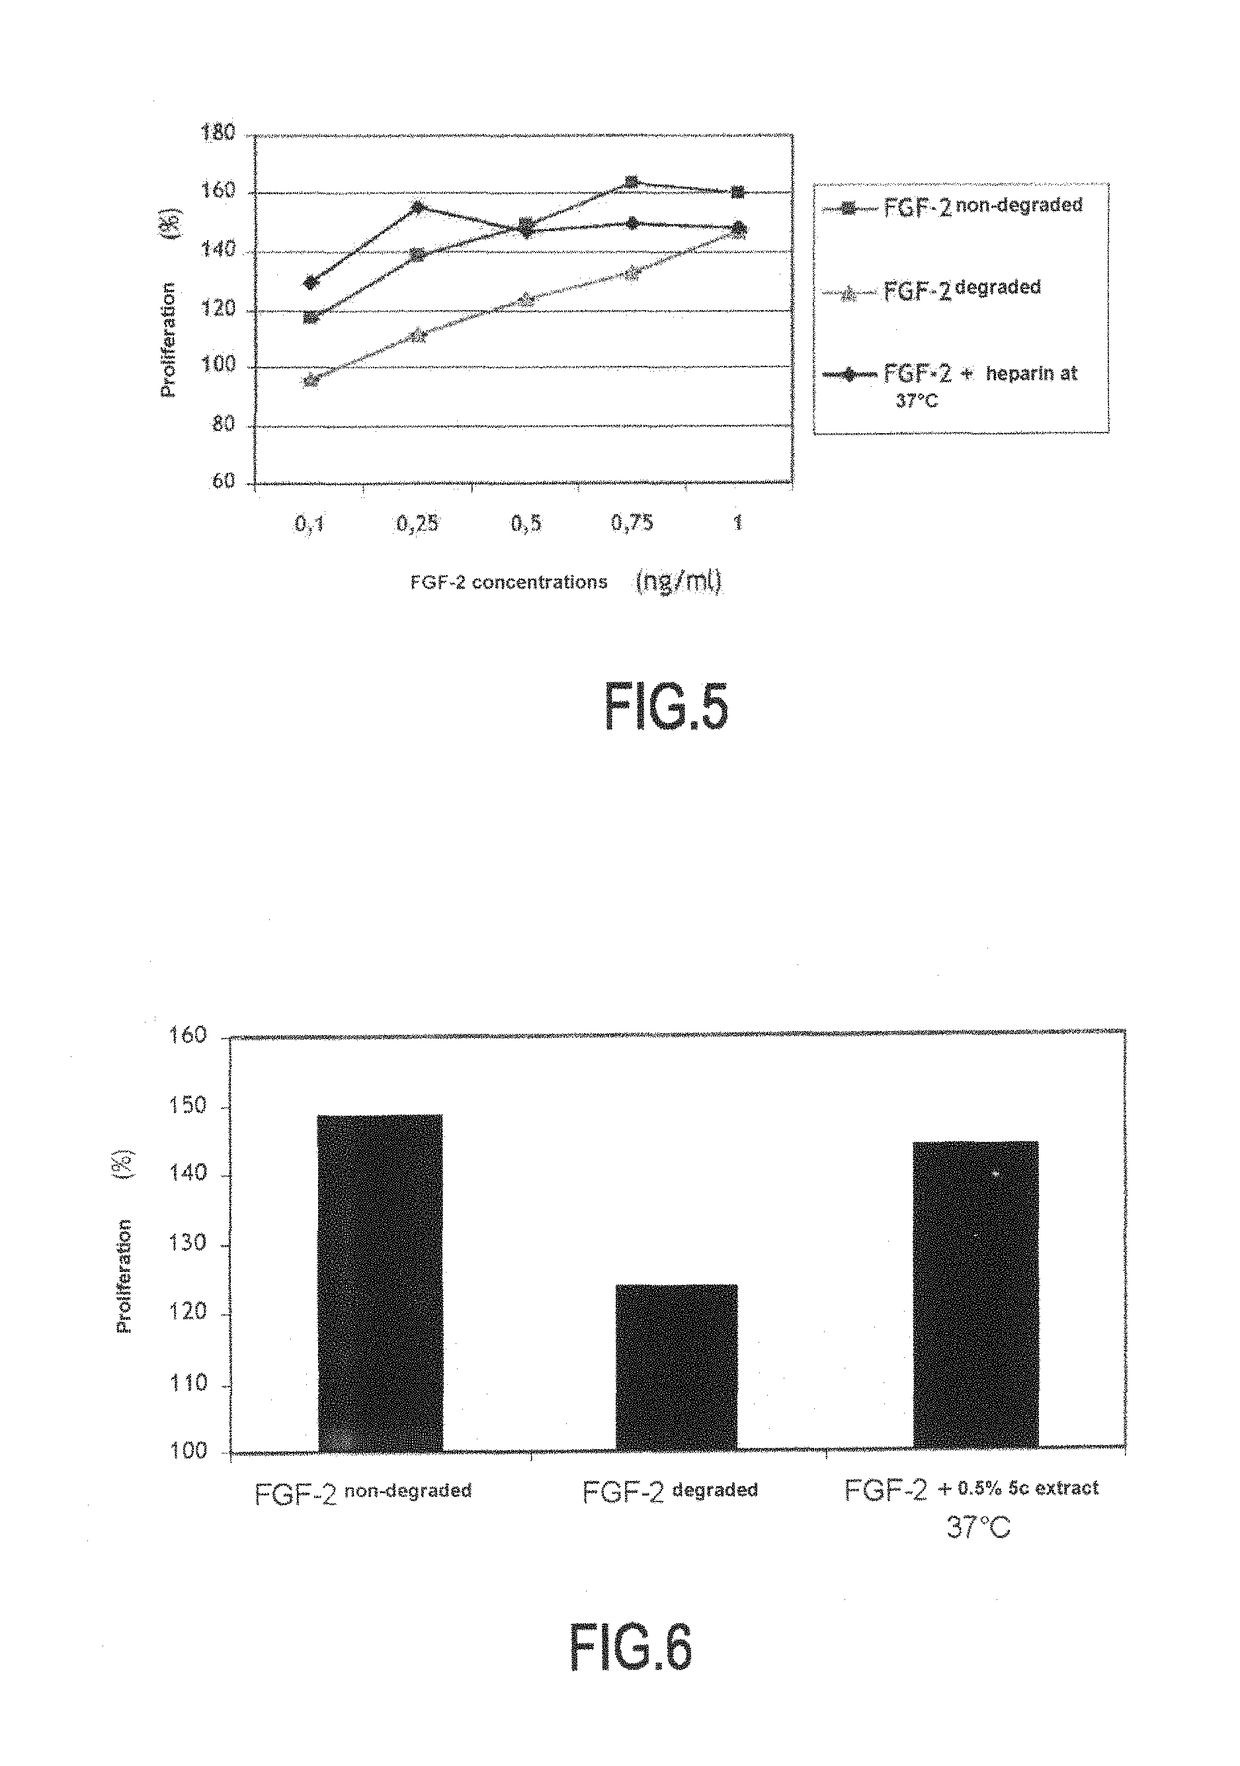 Use of substances to protect FGF-2 or FGF-beta growth factor